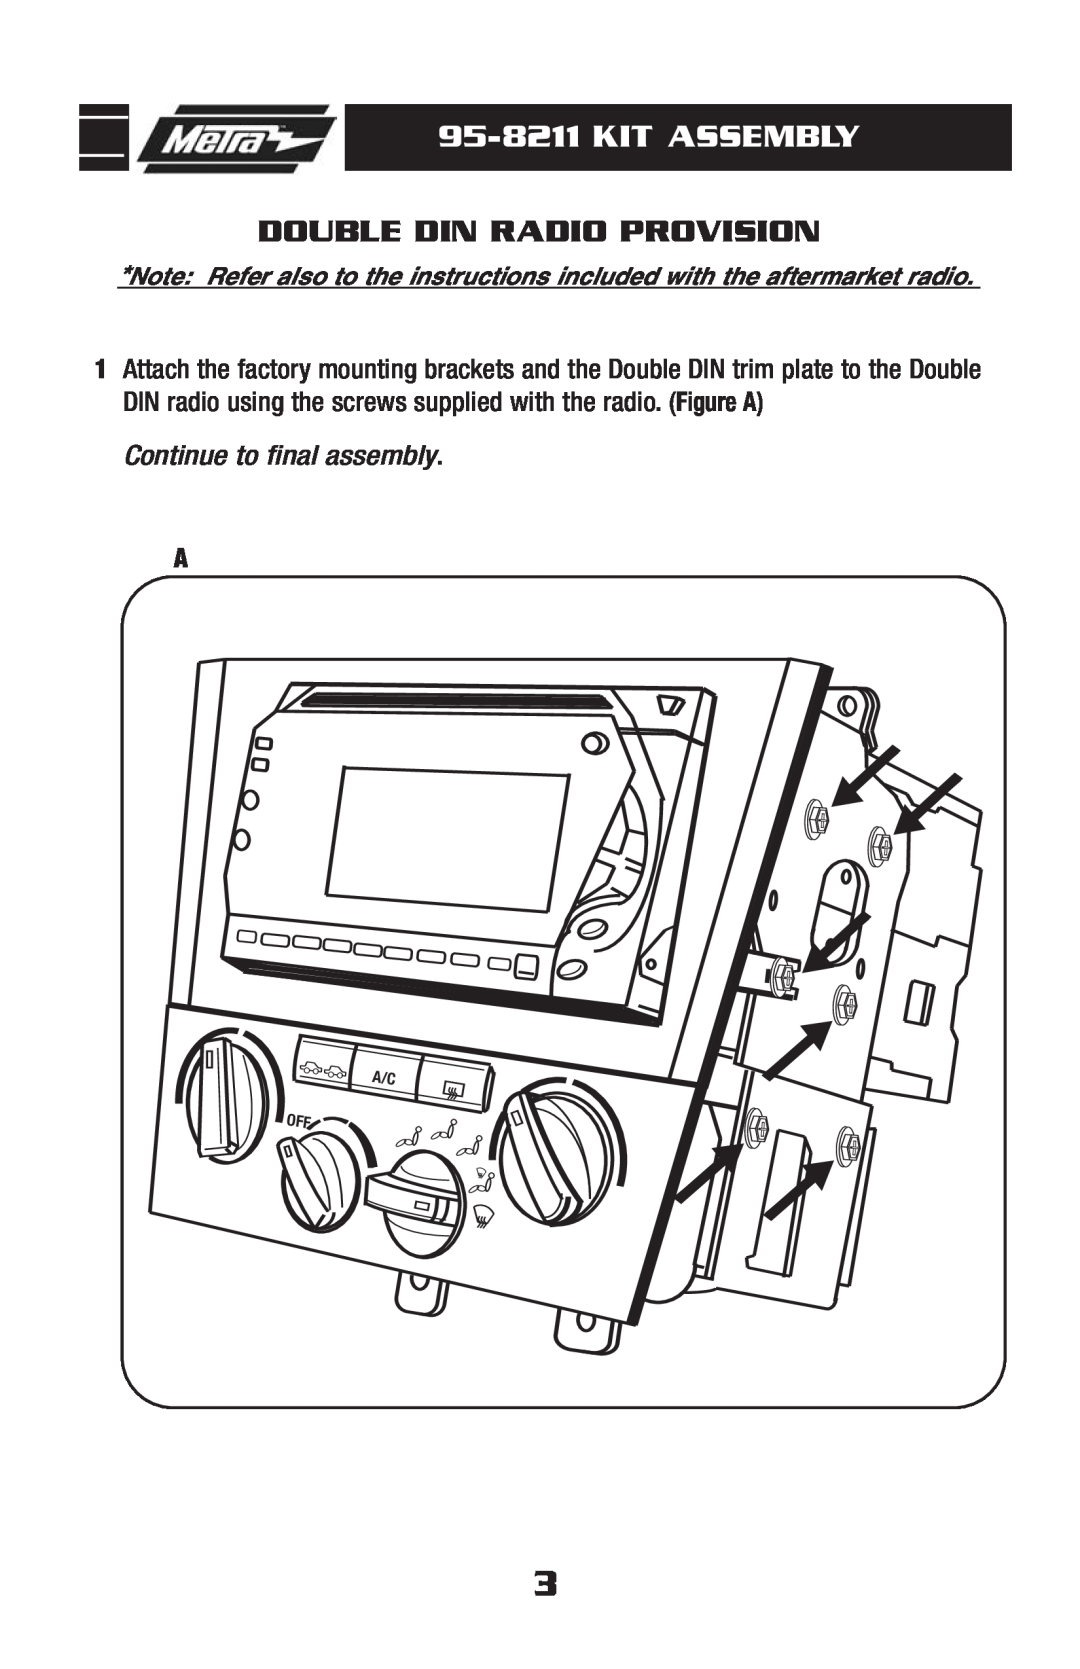 Toyota 95-8211 installation instructions Kit Assembly, Double Din Radio Provision, Continue to final assembly, A/C Off 